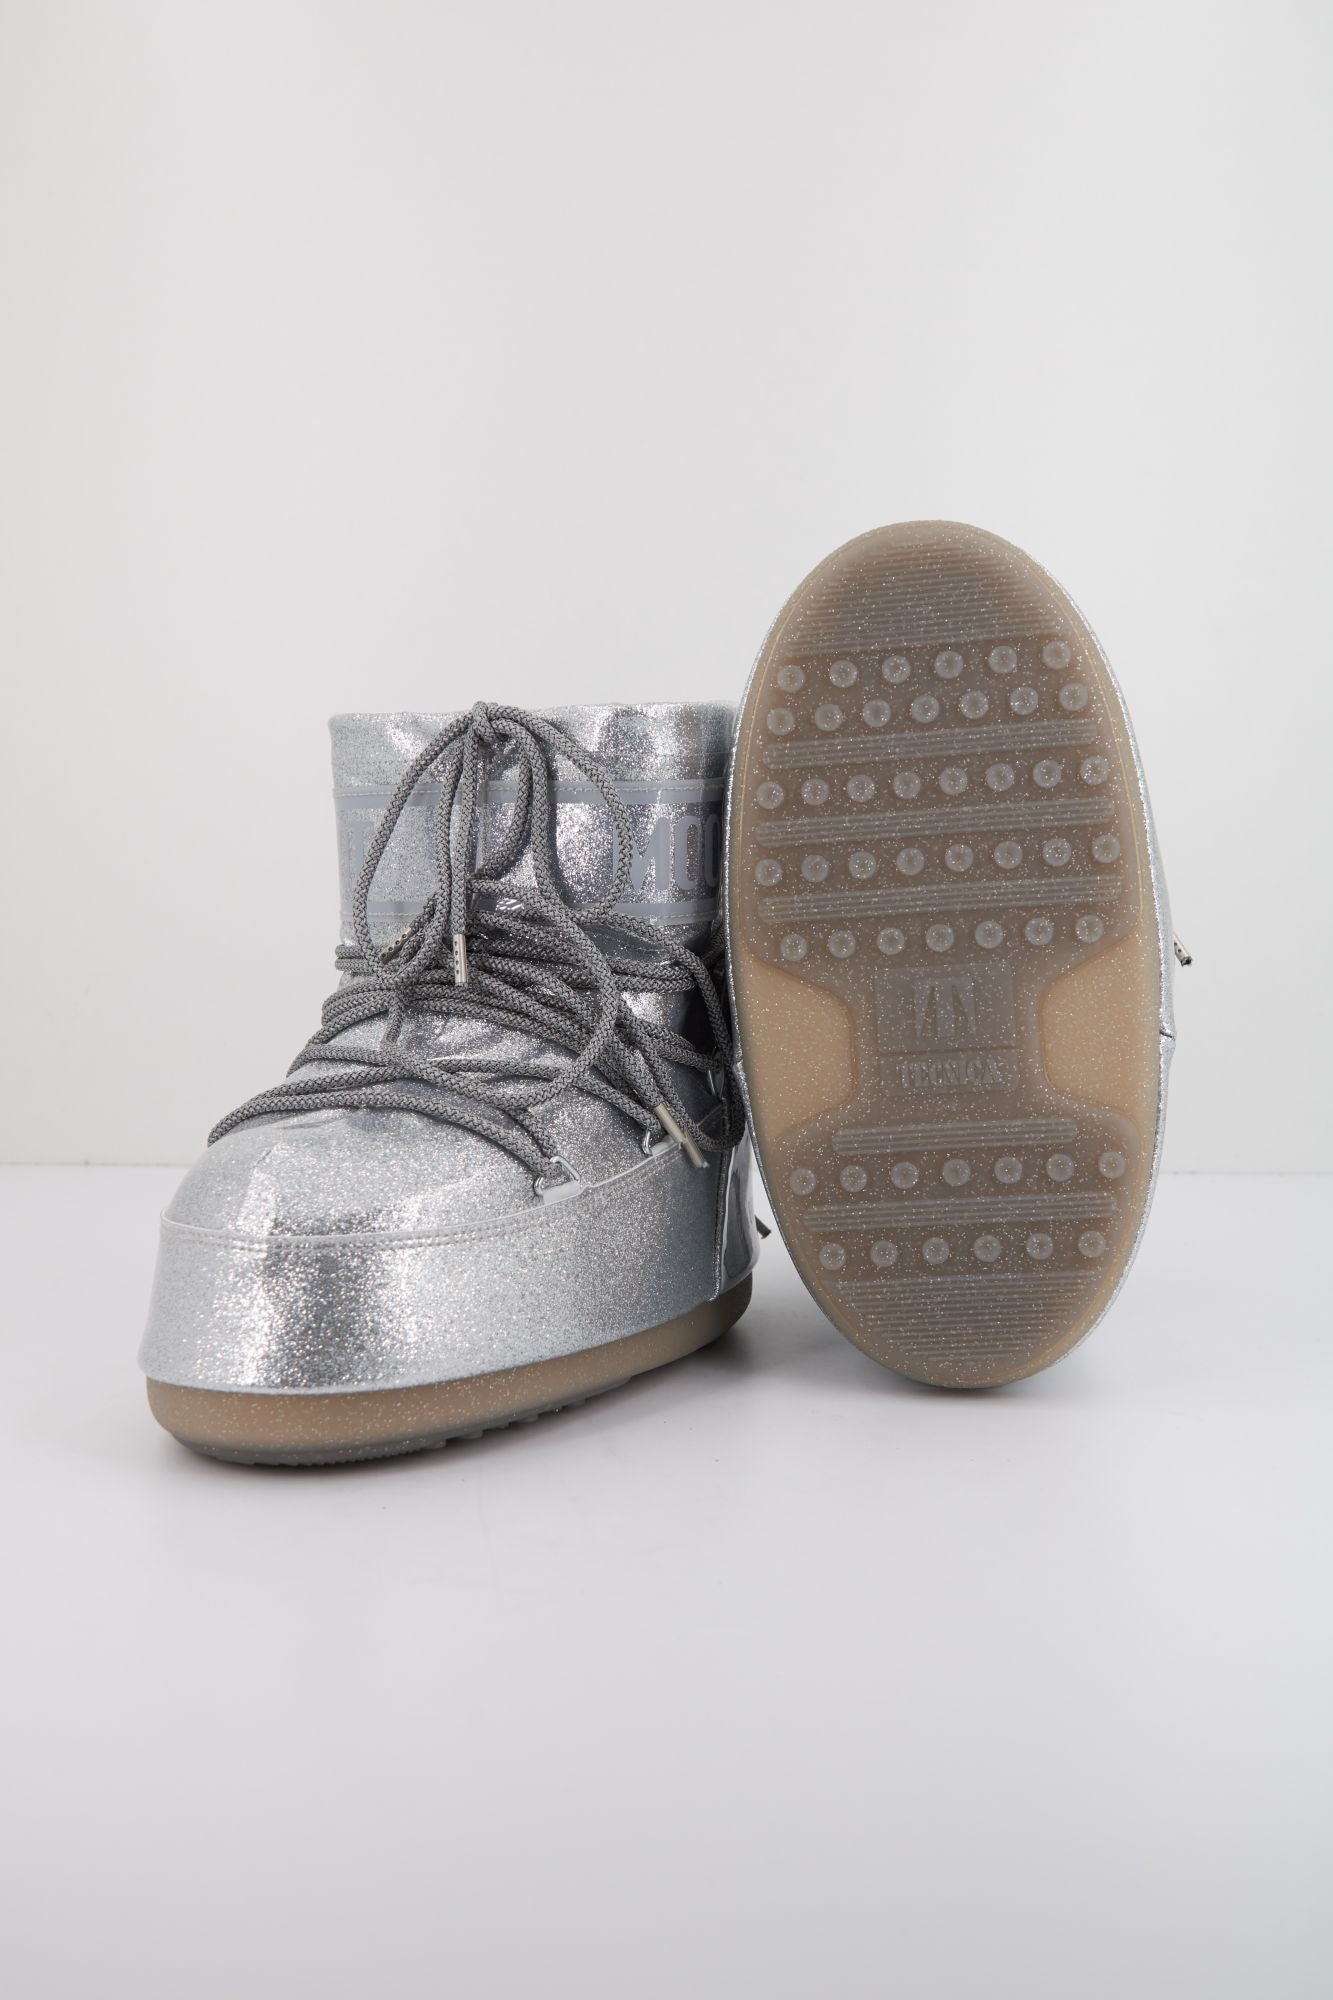 MOON BOOT MB ICON LOW GLITTER en color PLATA (4)